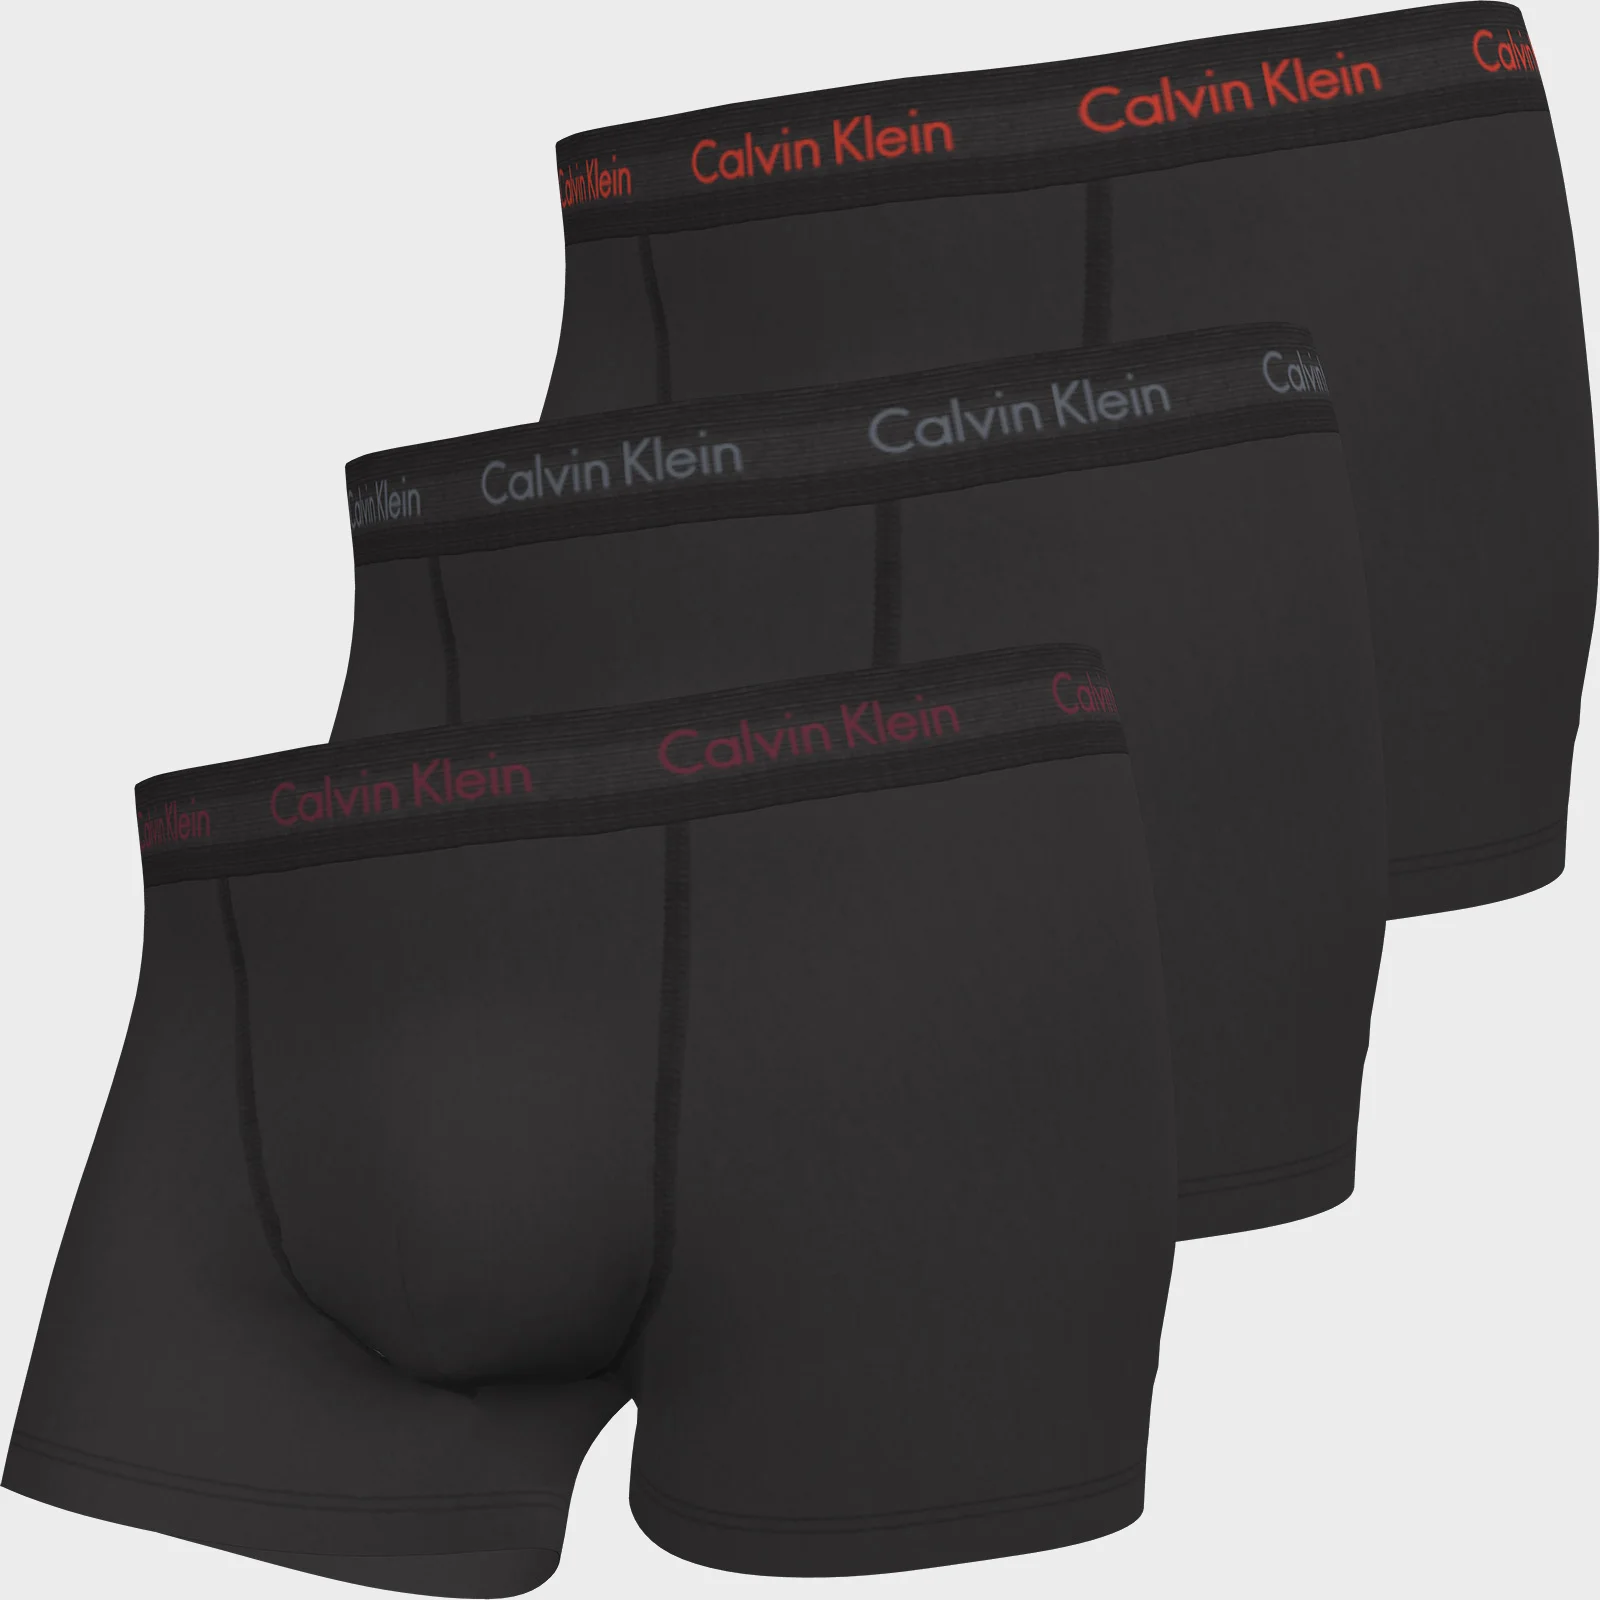 Calvin Klein Men's Cotton Stretch 3 Pack Trunks with Contrast Waistband - B-Red/Pewter/Winterberry Logo Image 1